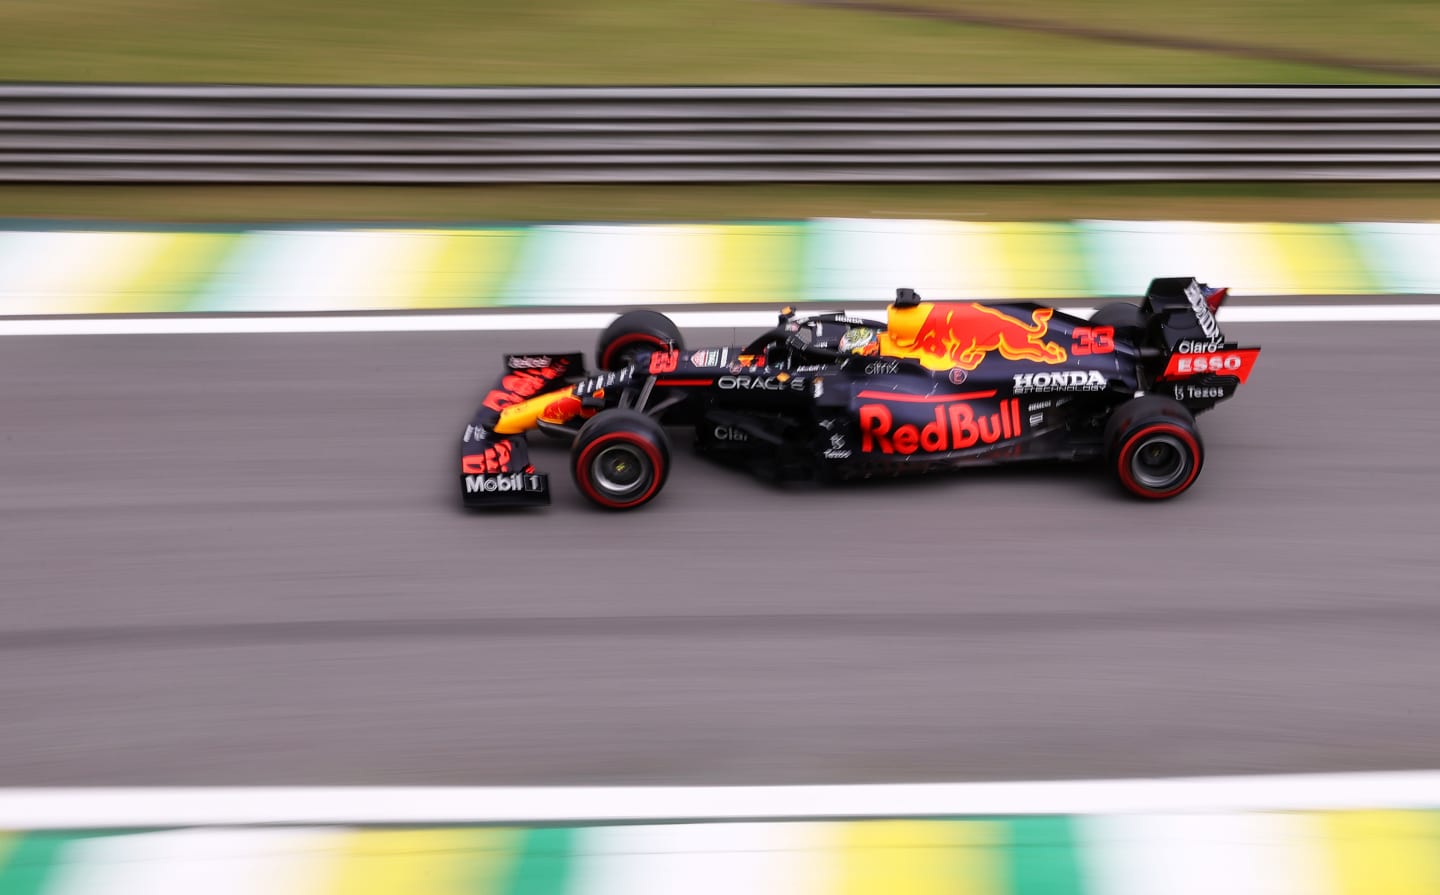 SAO PAULO, BRAZIL - NOVEMBER 12: Max Verstappen of the Netherlands driving the (33) Red Bull Racing